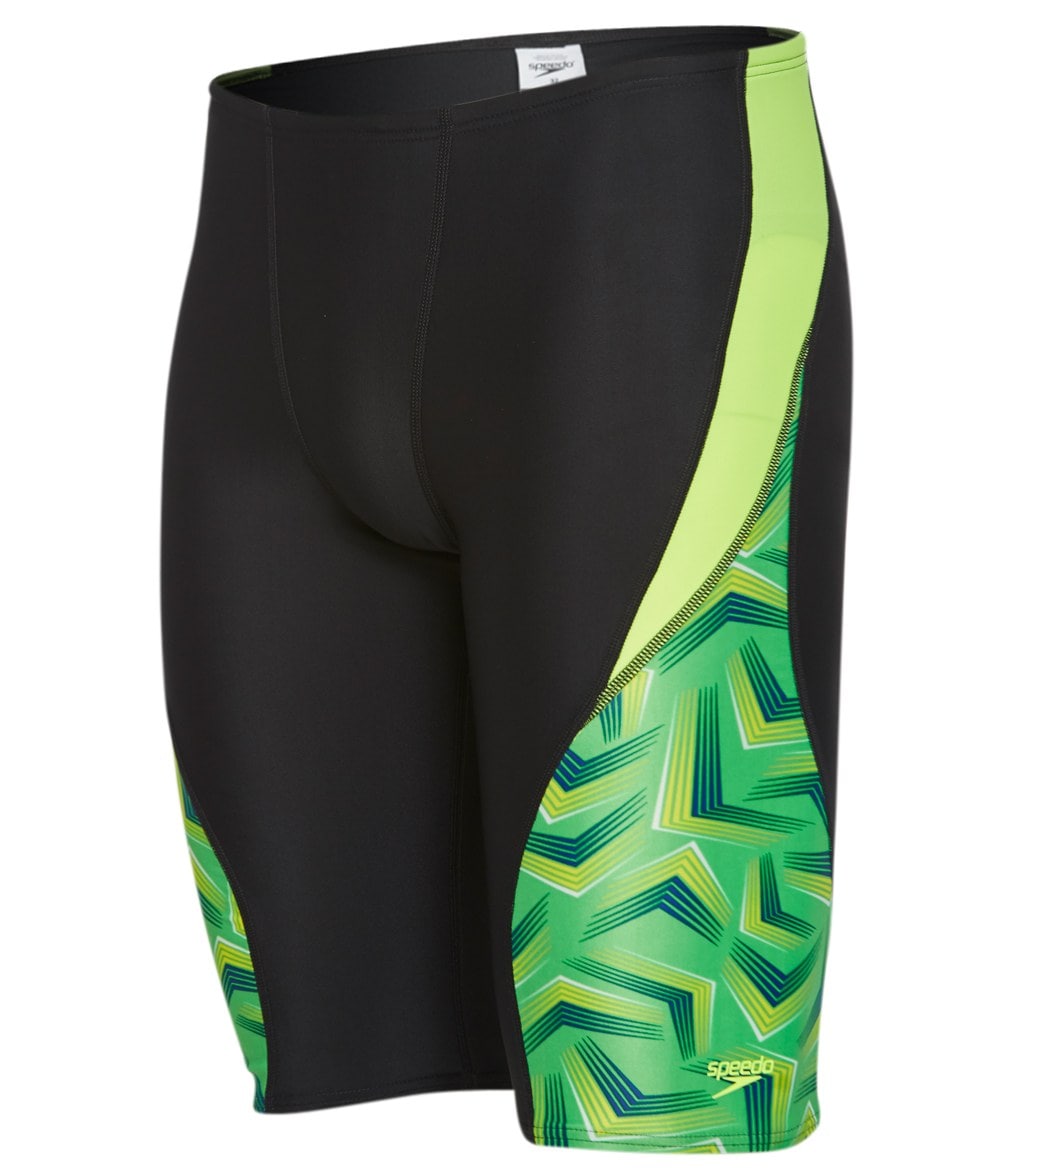 Speedo Men's Play The Angles Jammer Swimsuit at SwimOutlet.com